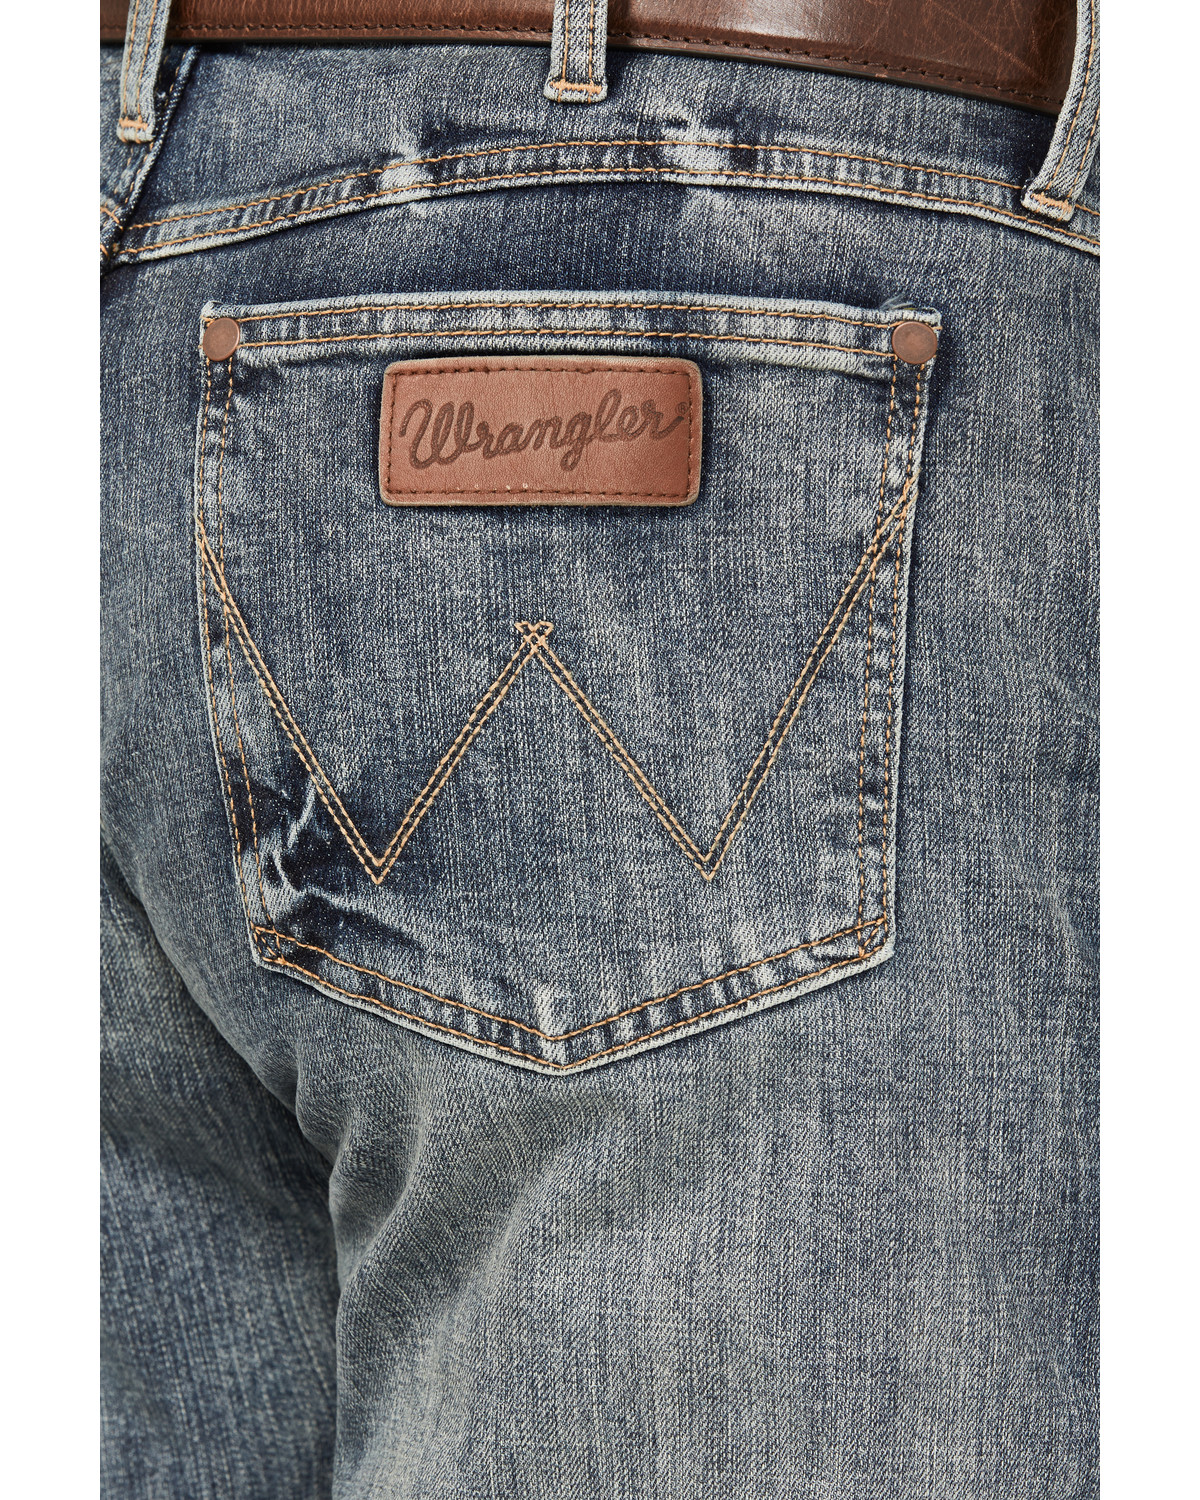 Wrangler Men's Retro Slim Fit Boot Cut Jeans - Country Outfitter